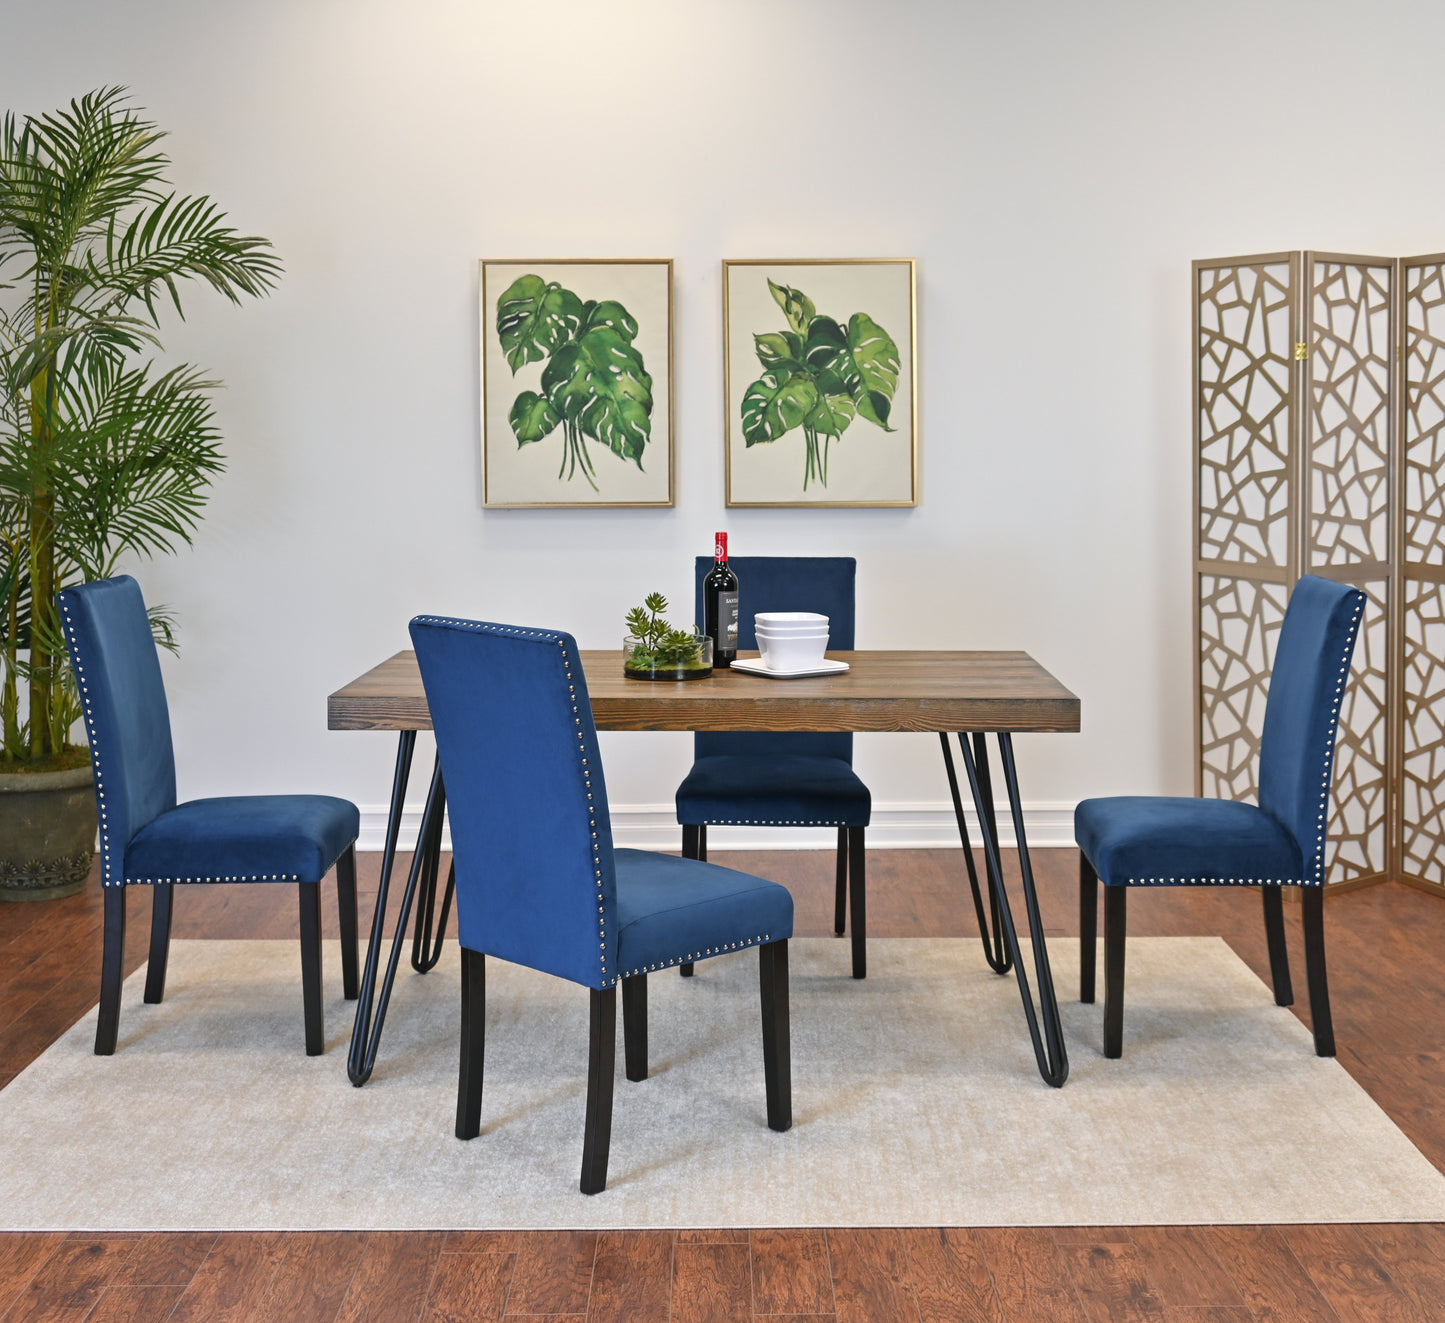 Ashzo 5-Piece Dining Set, Hairpin Dining Table with 4 Chairs, 3 Color Options